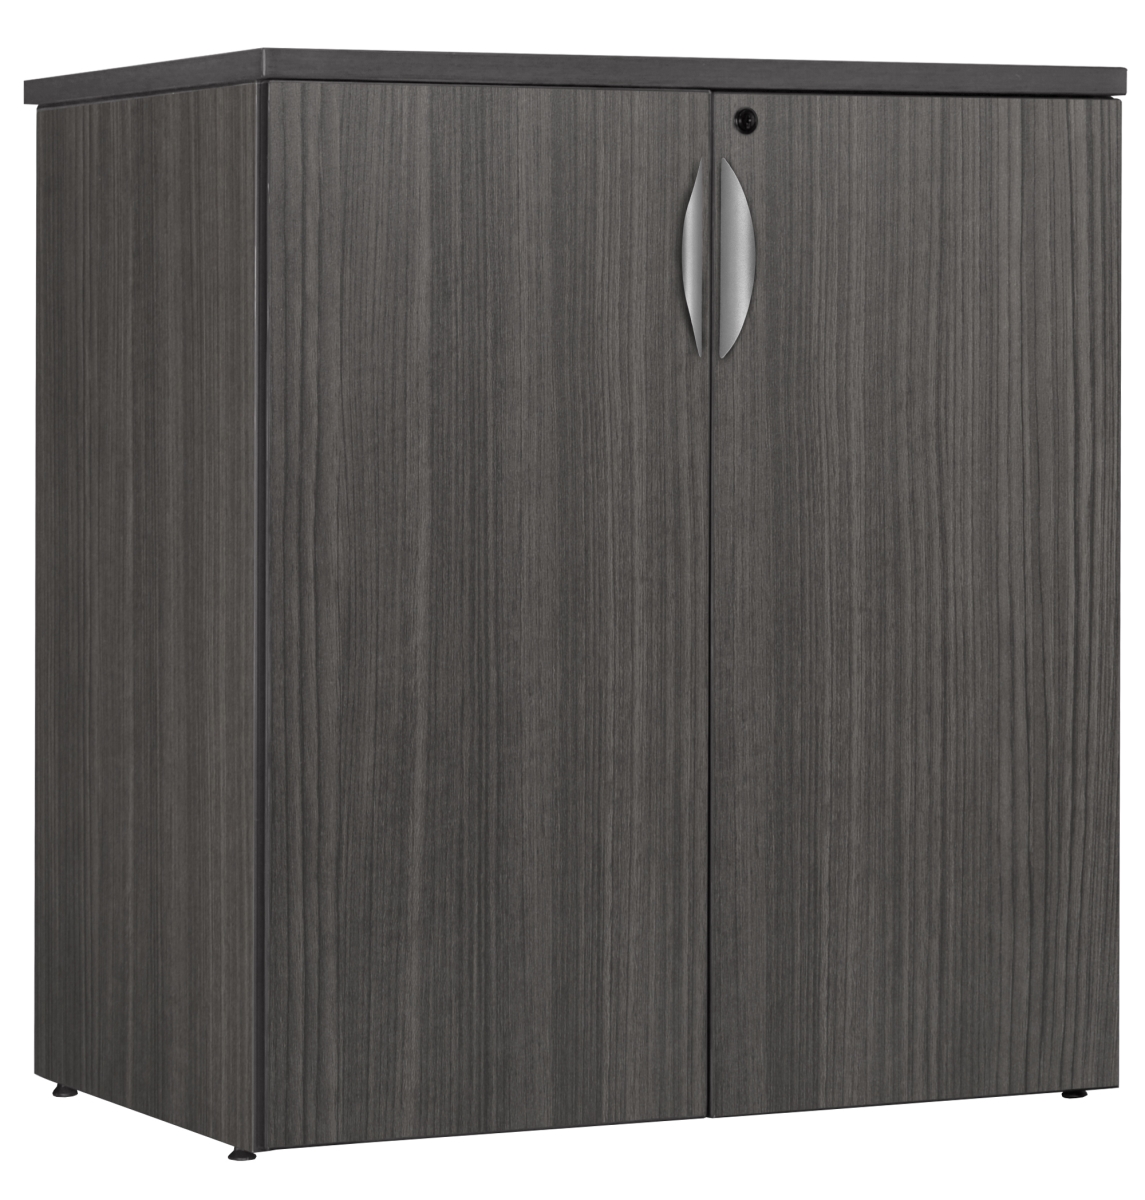 Lsc3535ag 35 In. Legacy Stackable Storage Cabinet, Ash Grey